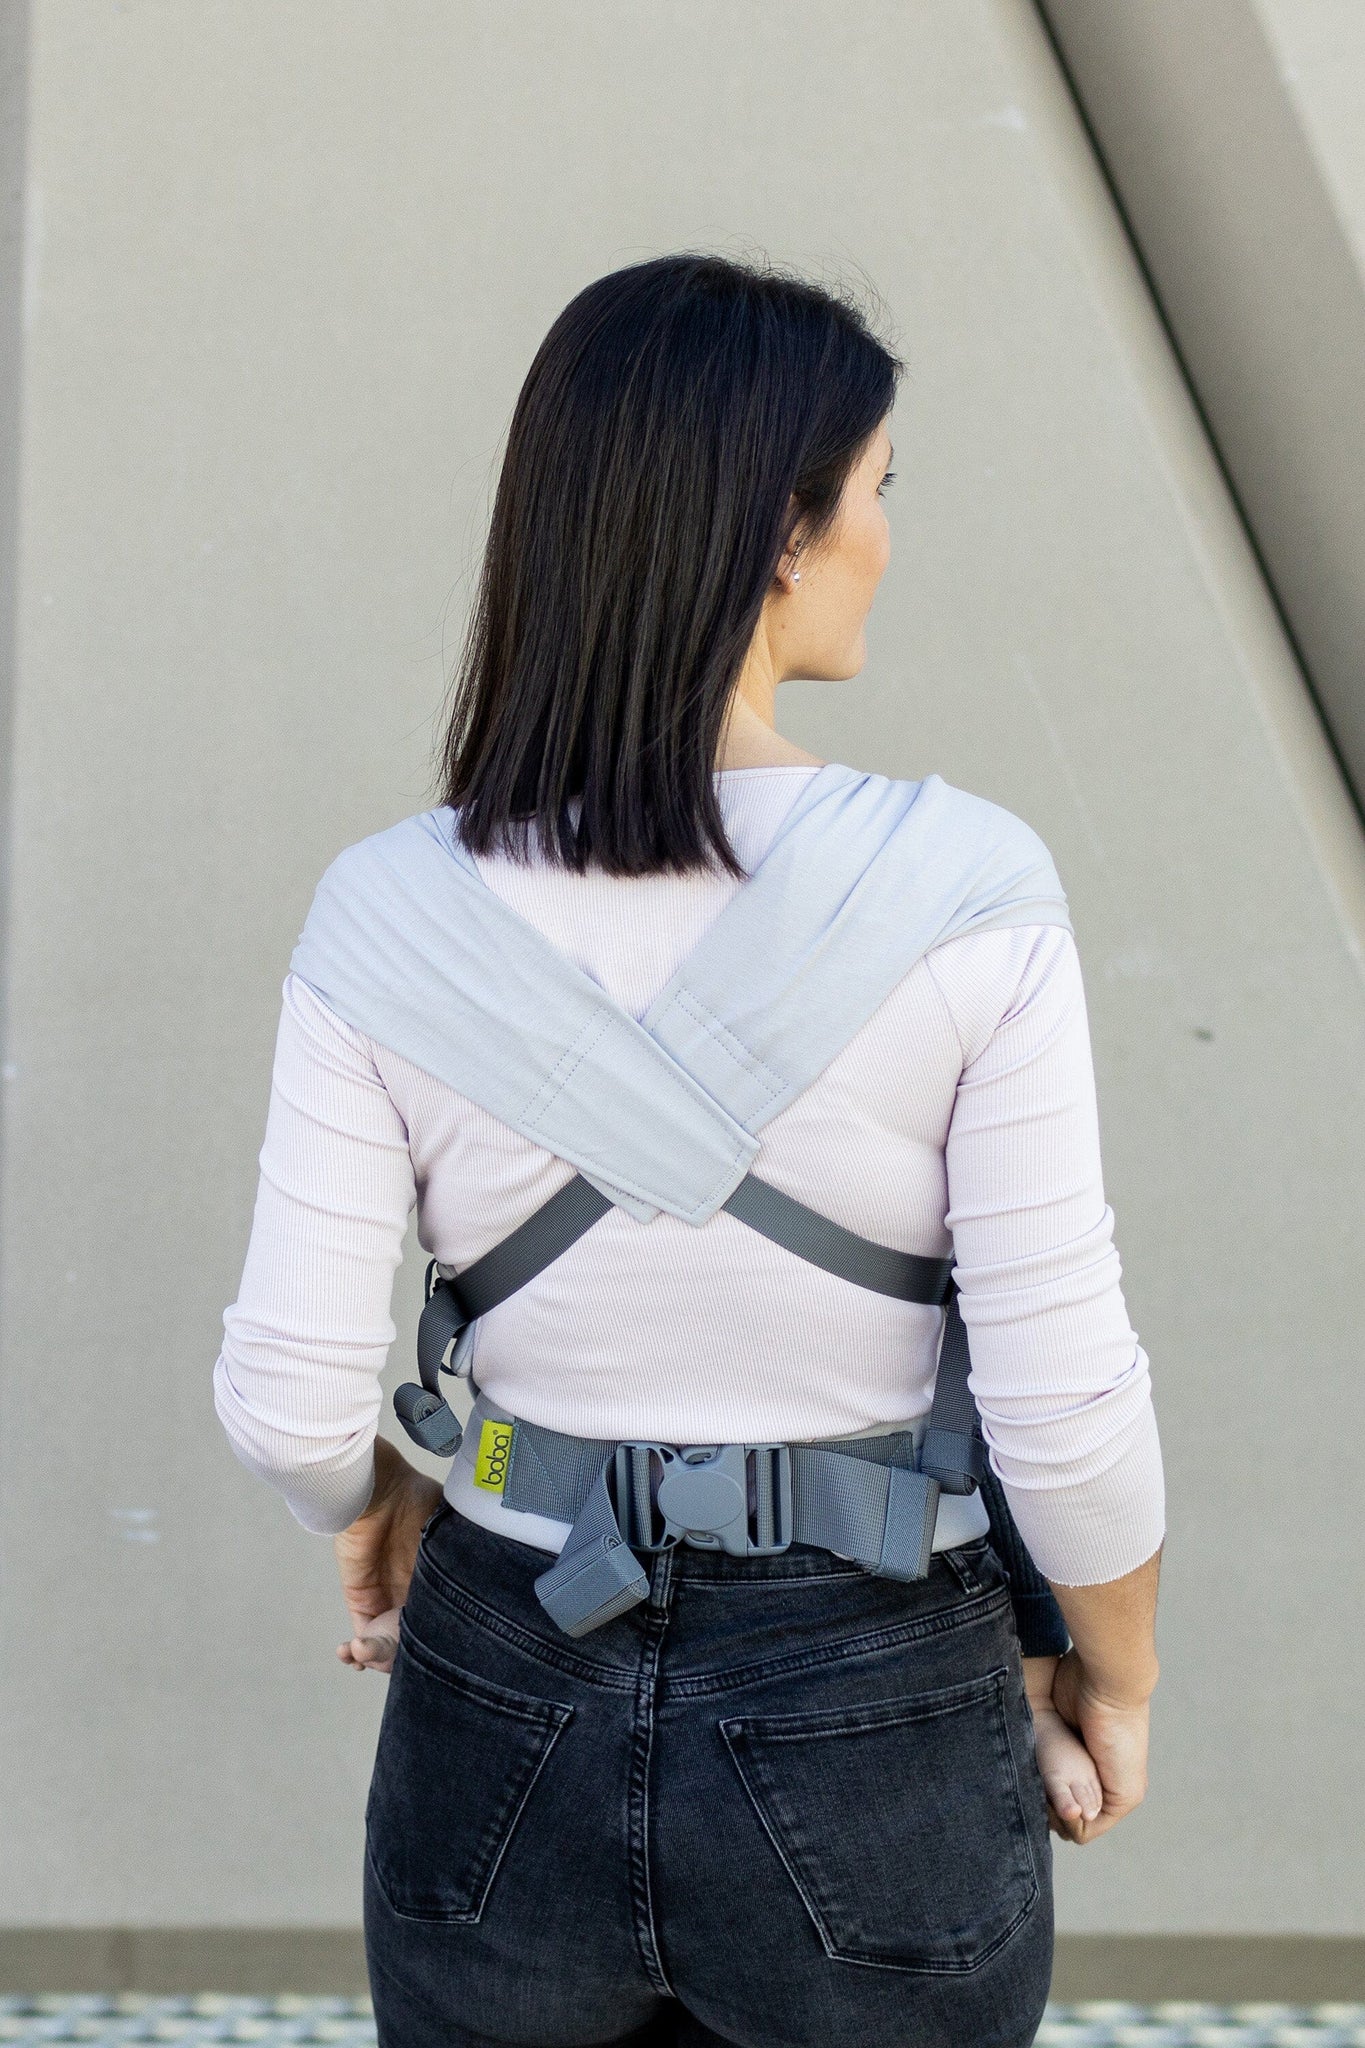 Say hello to Boba Bliss Baby Carrier! With its two layer stretchy elastic knit fabric, this newborn baby carrier offers cocoon-like comfort for your little one up to 18 months and 35 lbs (16 kg). Get yours today!